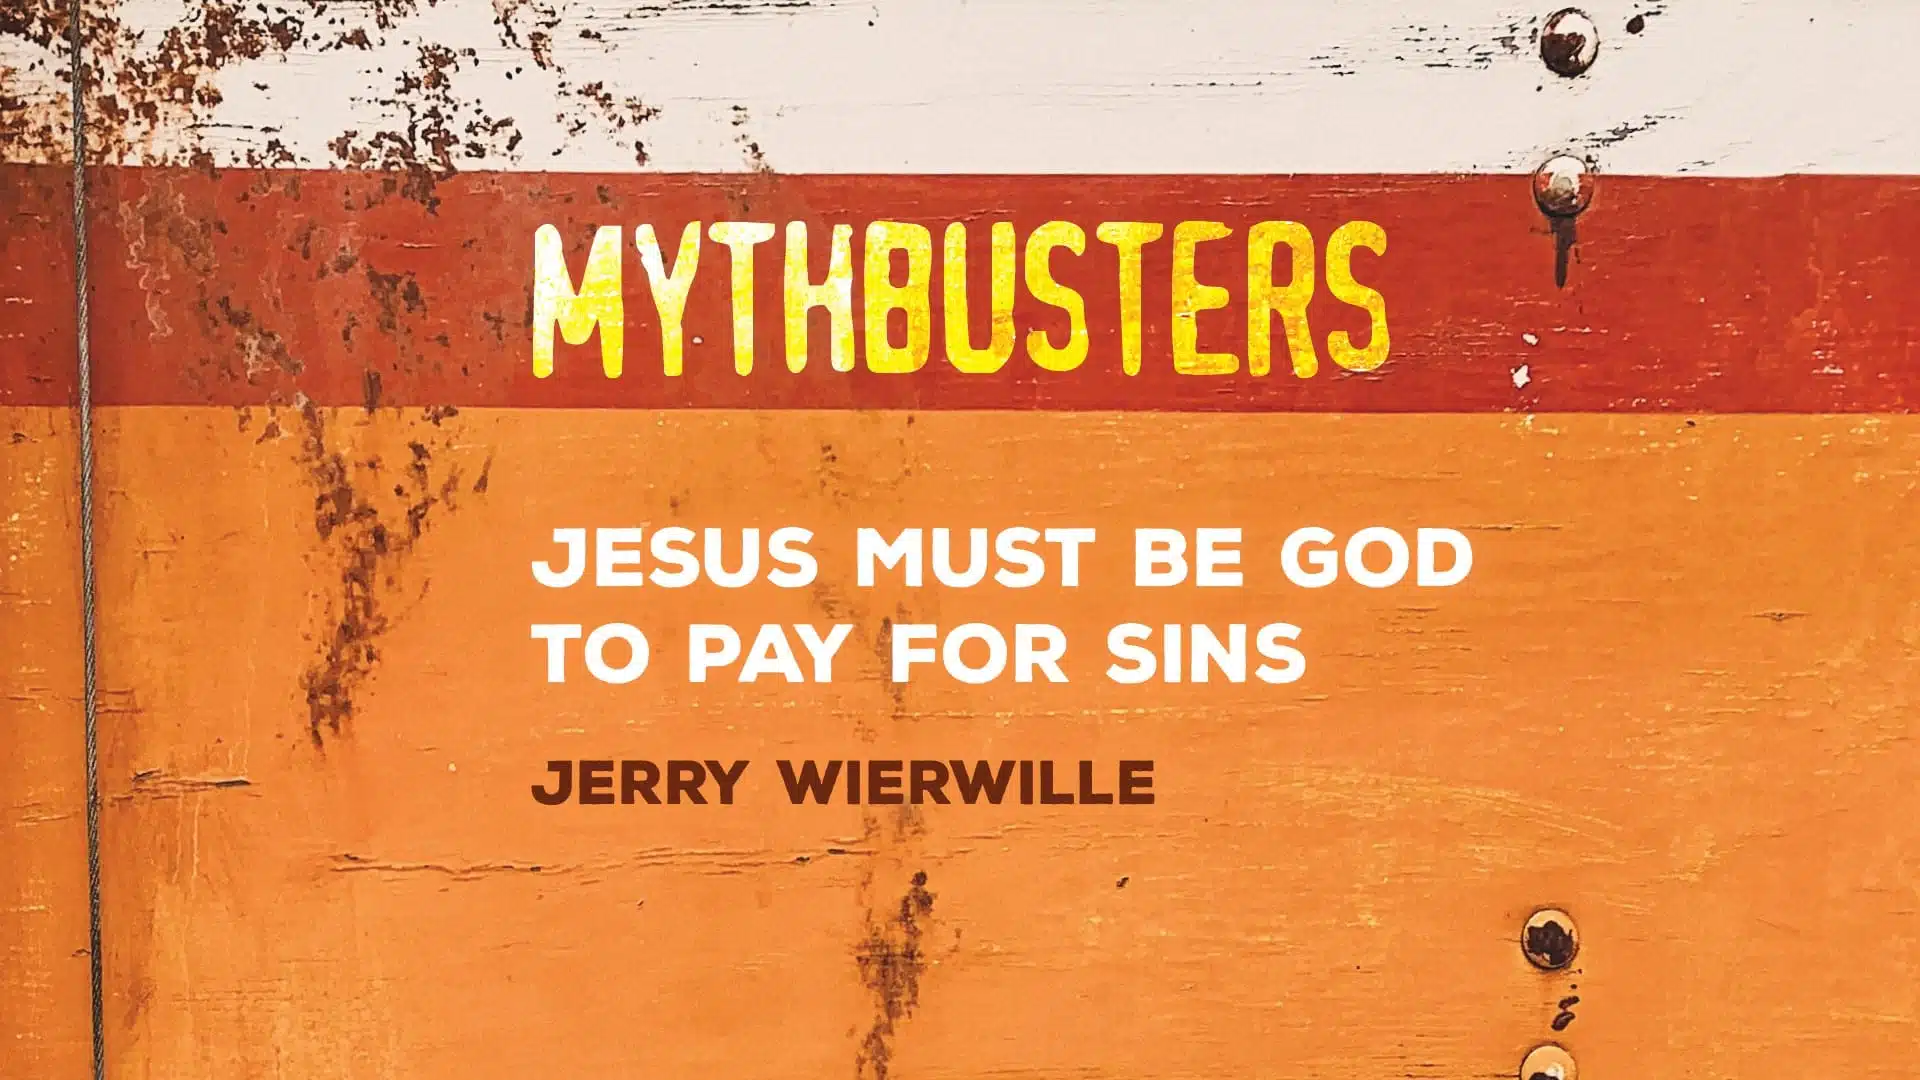 Myth: Jesus Must Be God to Pay for Sins